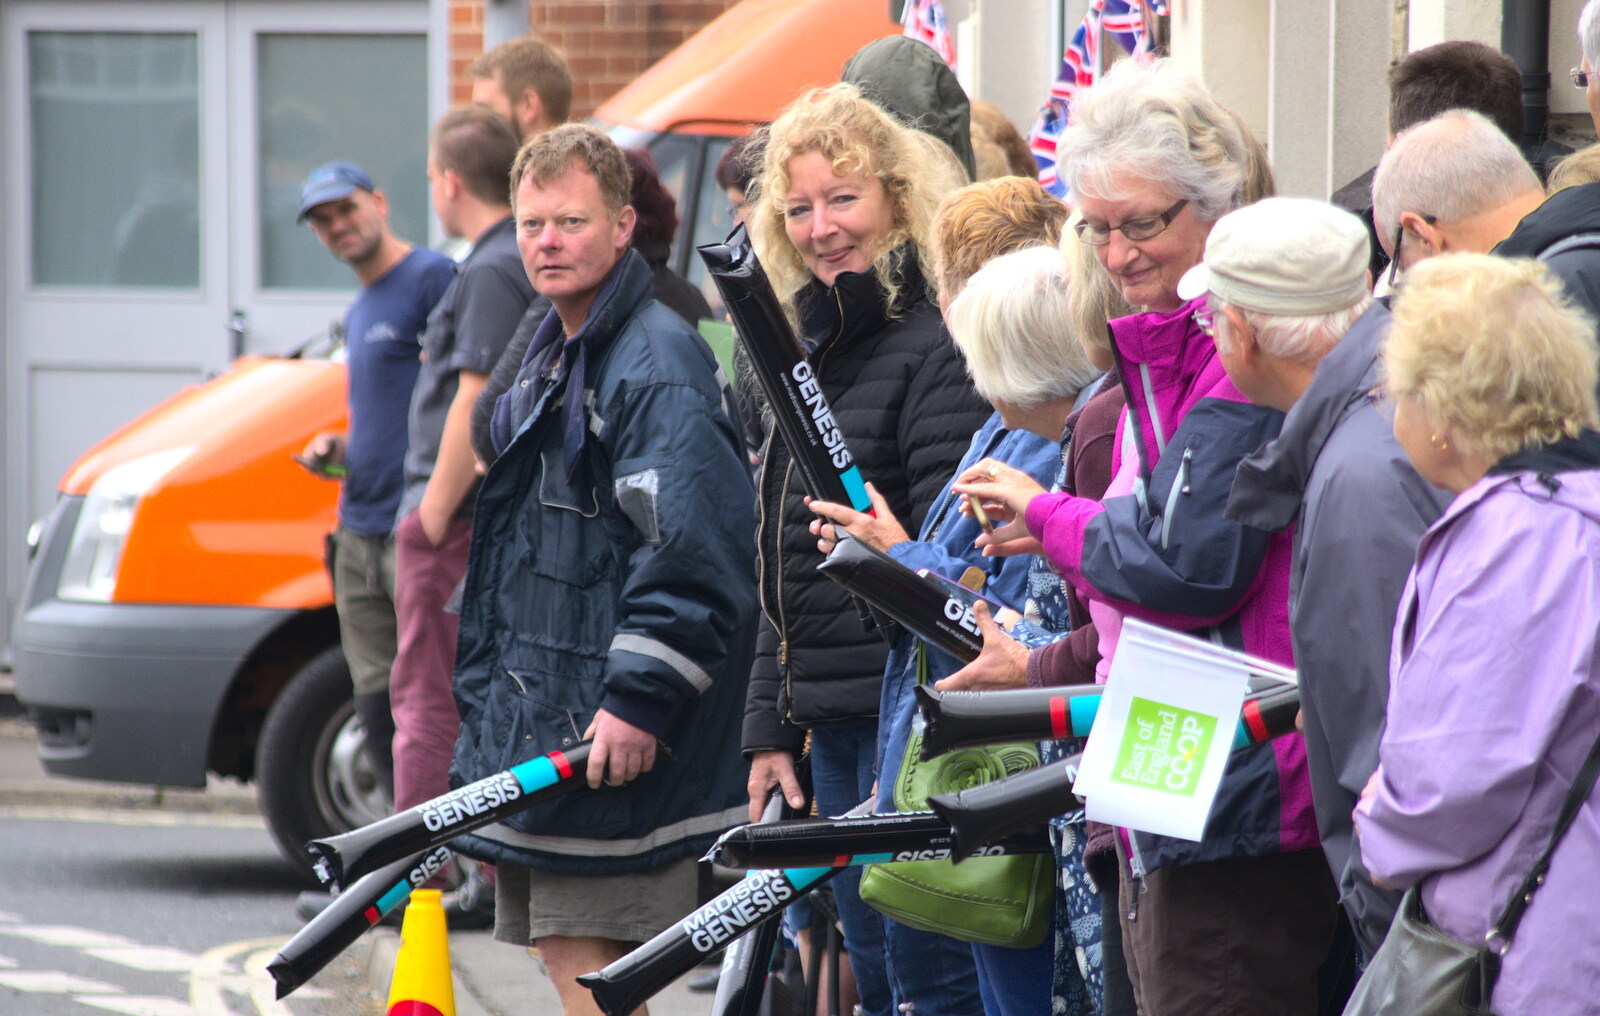 The crowd is ready with inflatable beaters from The Tour of Britain Does Eye, Suffolk - 8th September 2017